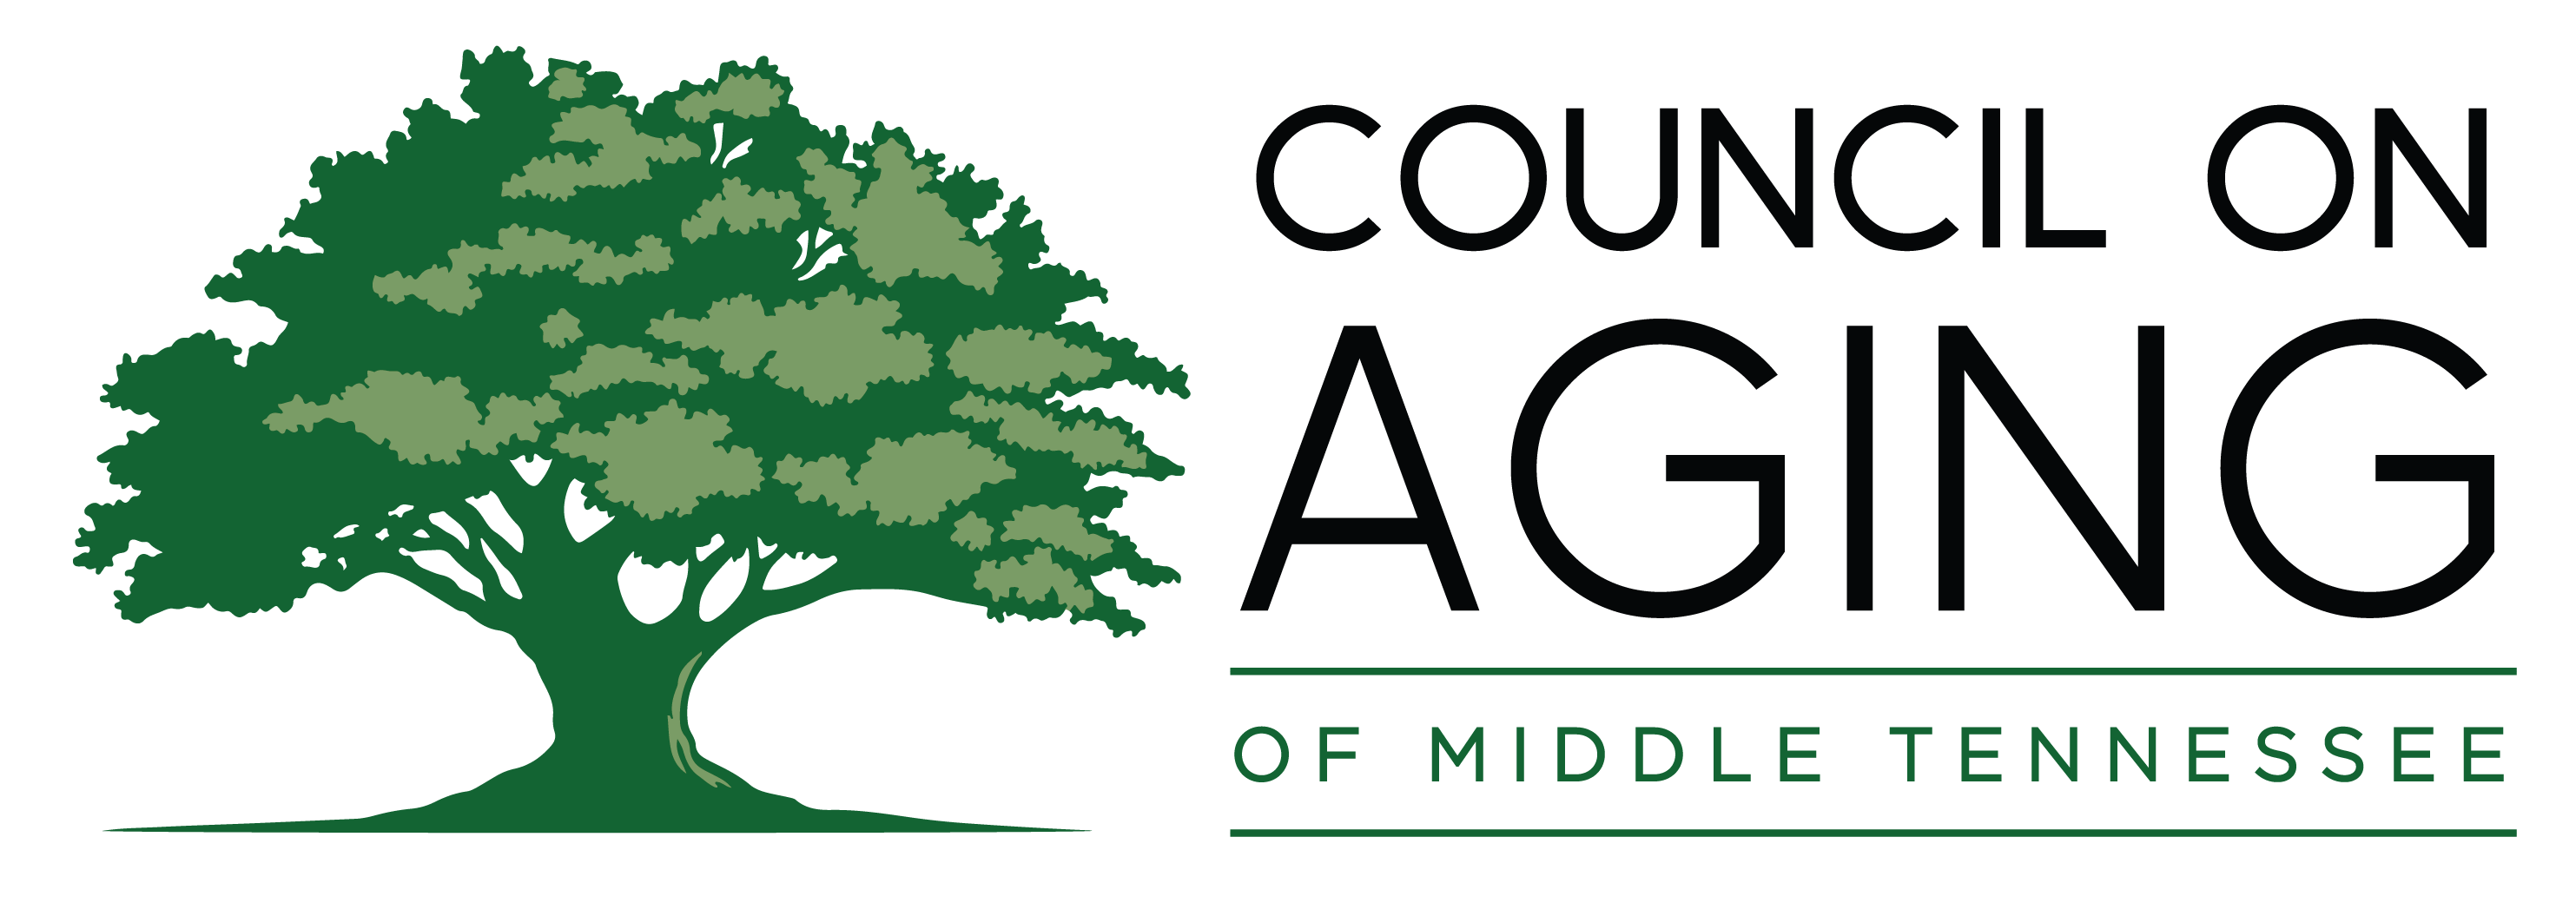 Aging Logo - Home - Council on Aging